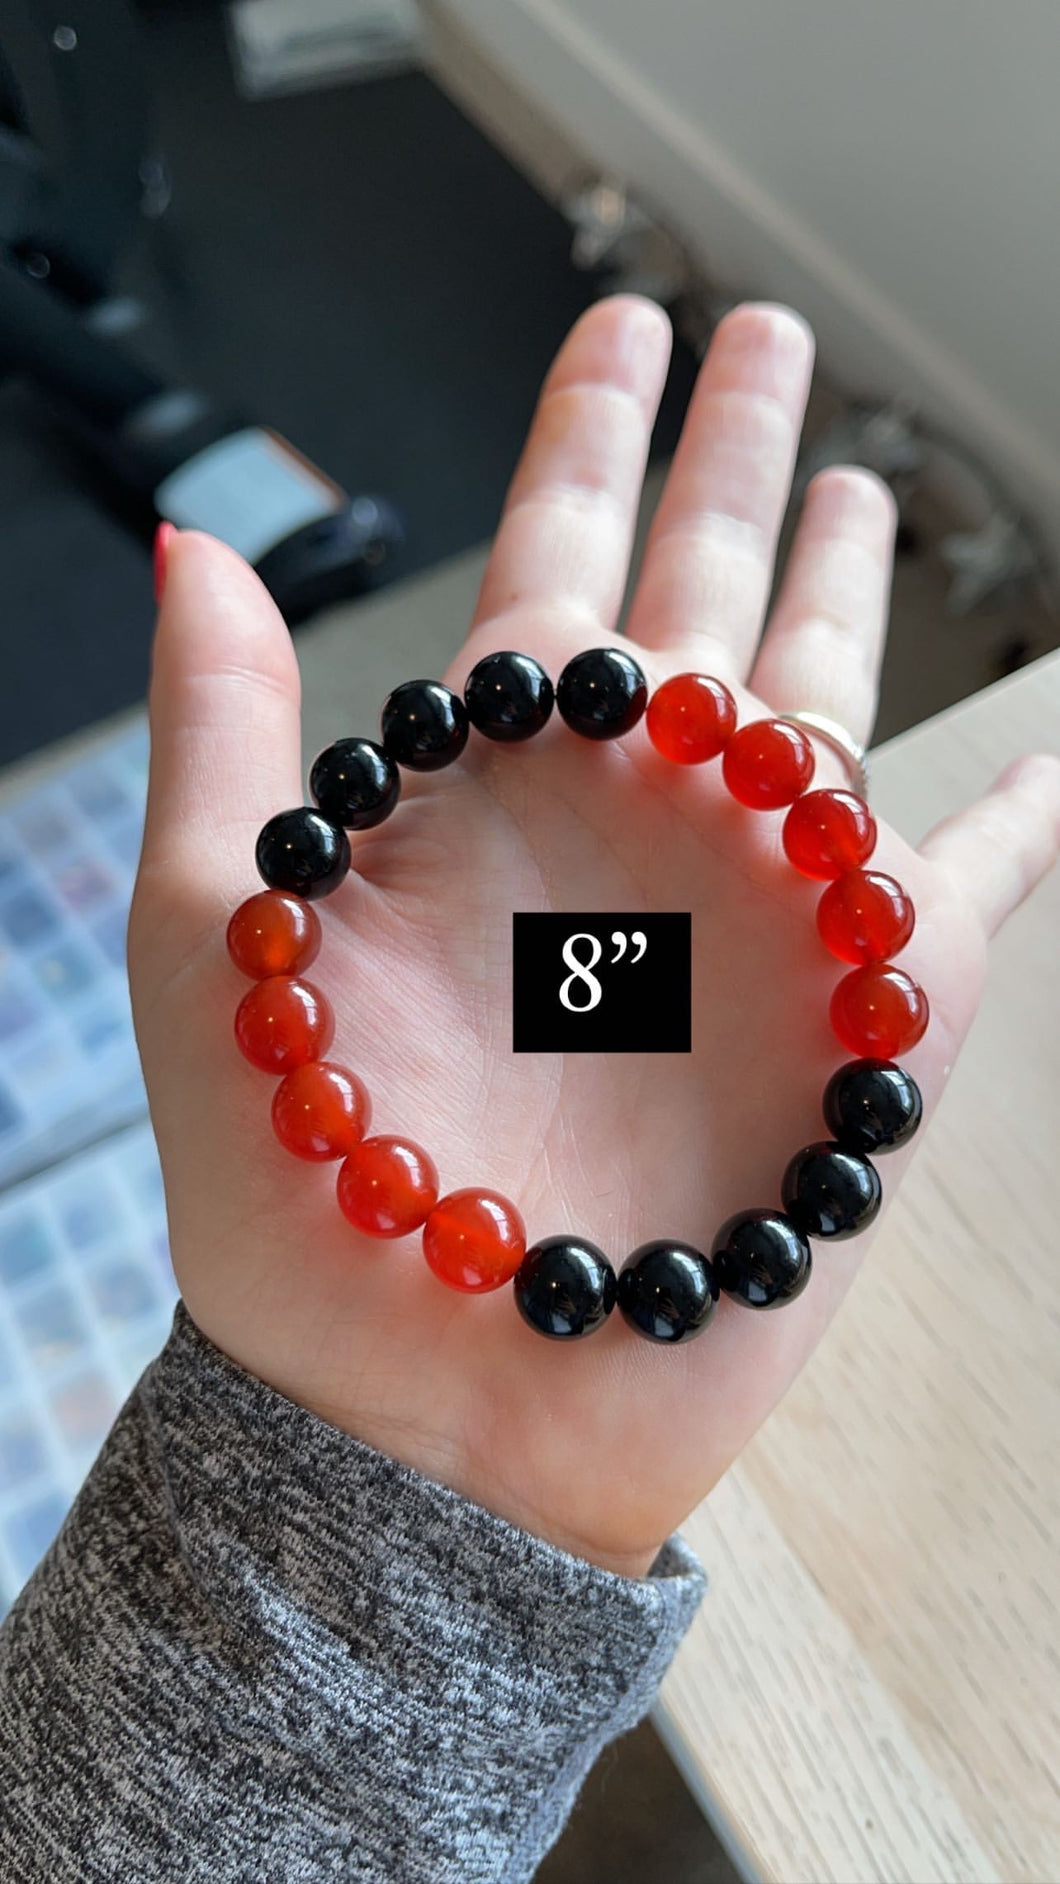 Reserved - 10mm Onyx + Red Carnelian - 8”